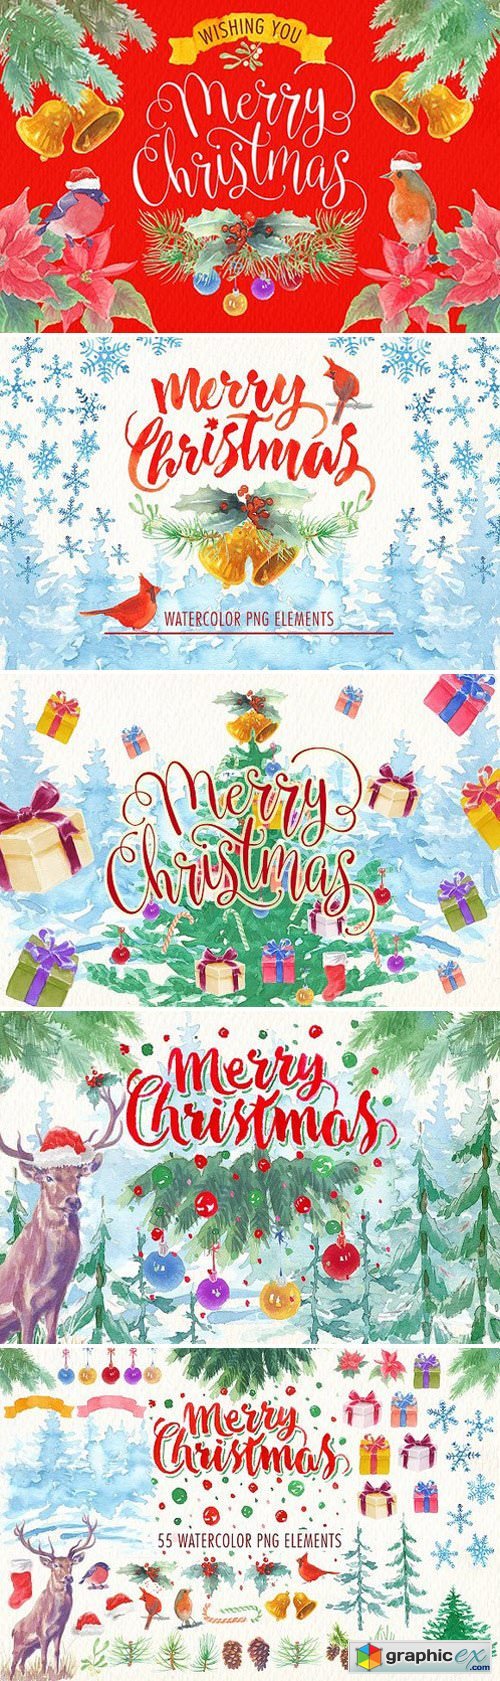 Watercolor christmas png elements 1782924